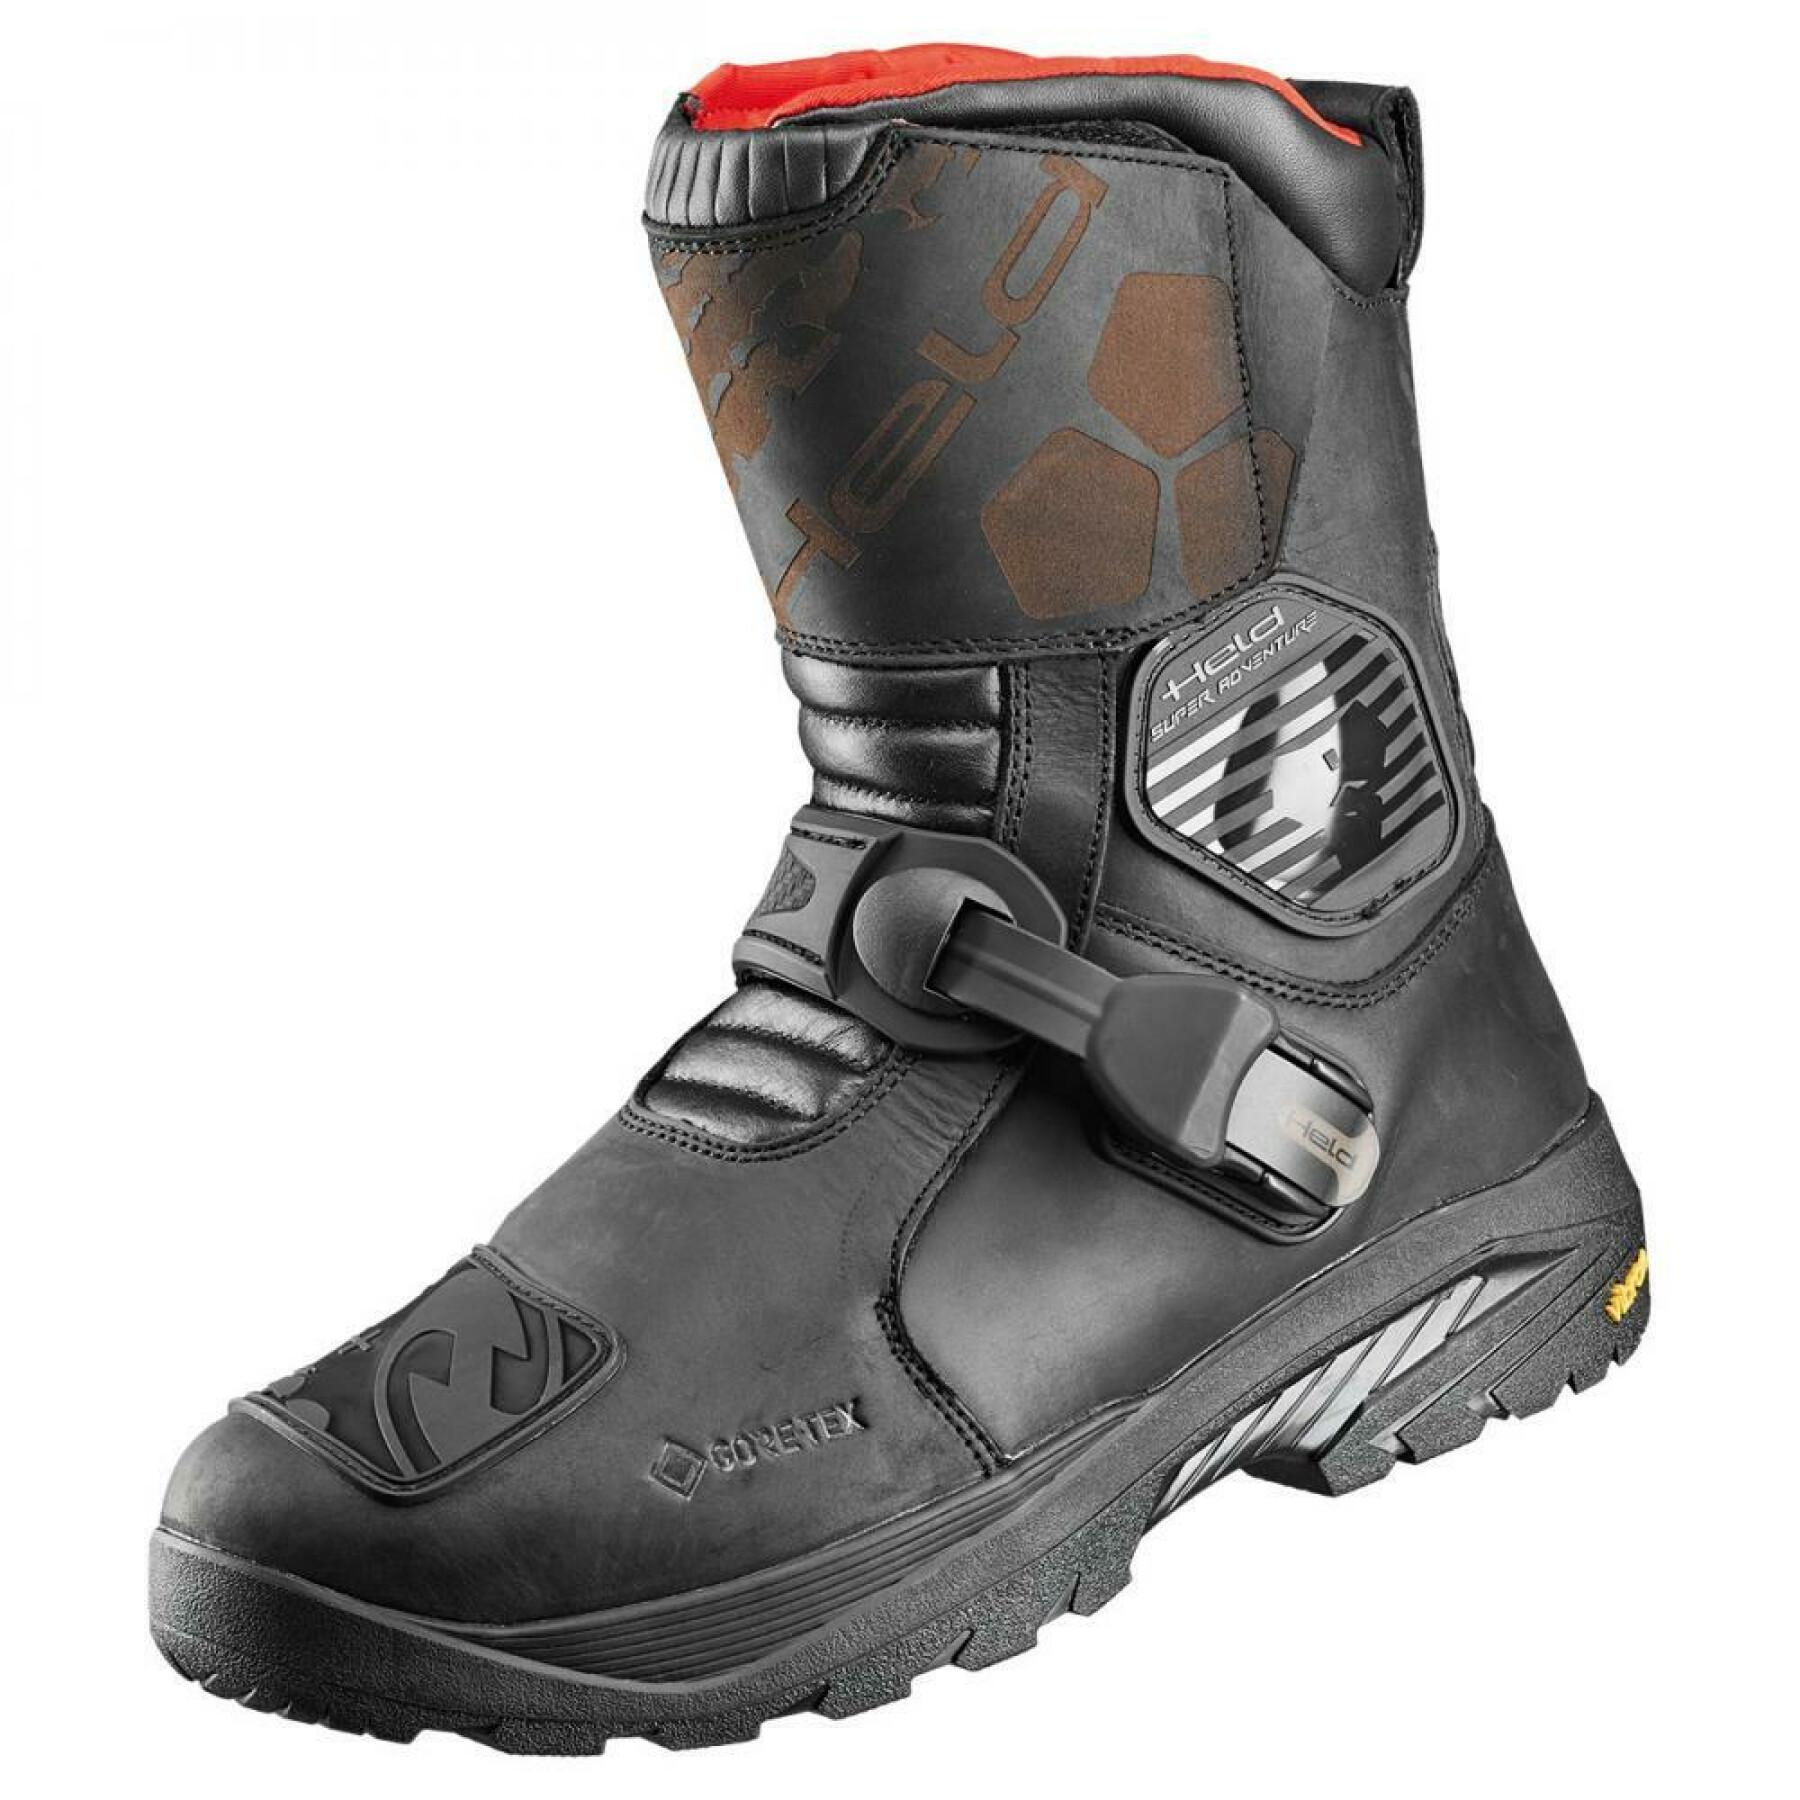 Gore-tex motorcycle boots Held brickland lc